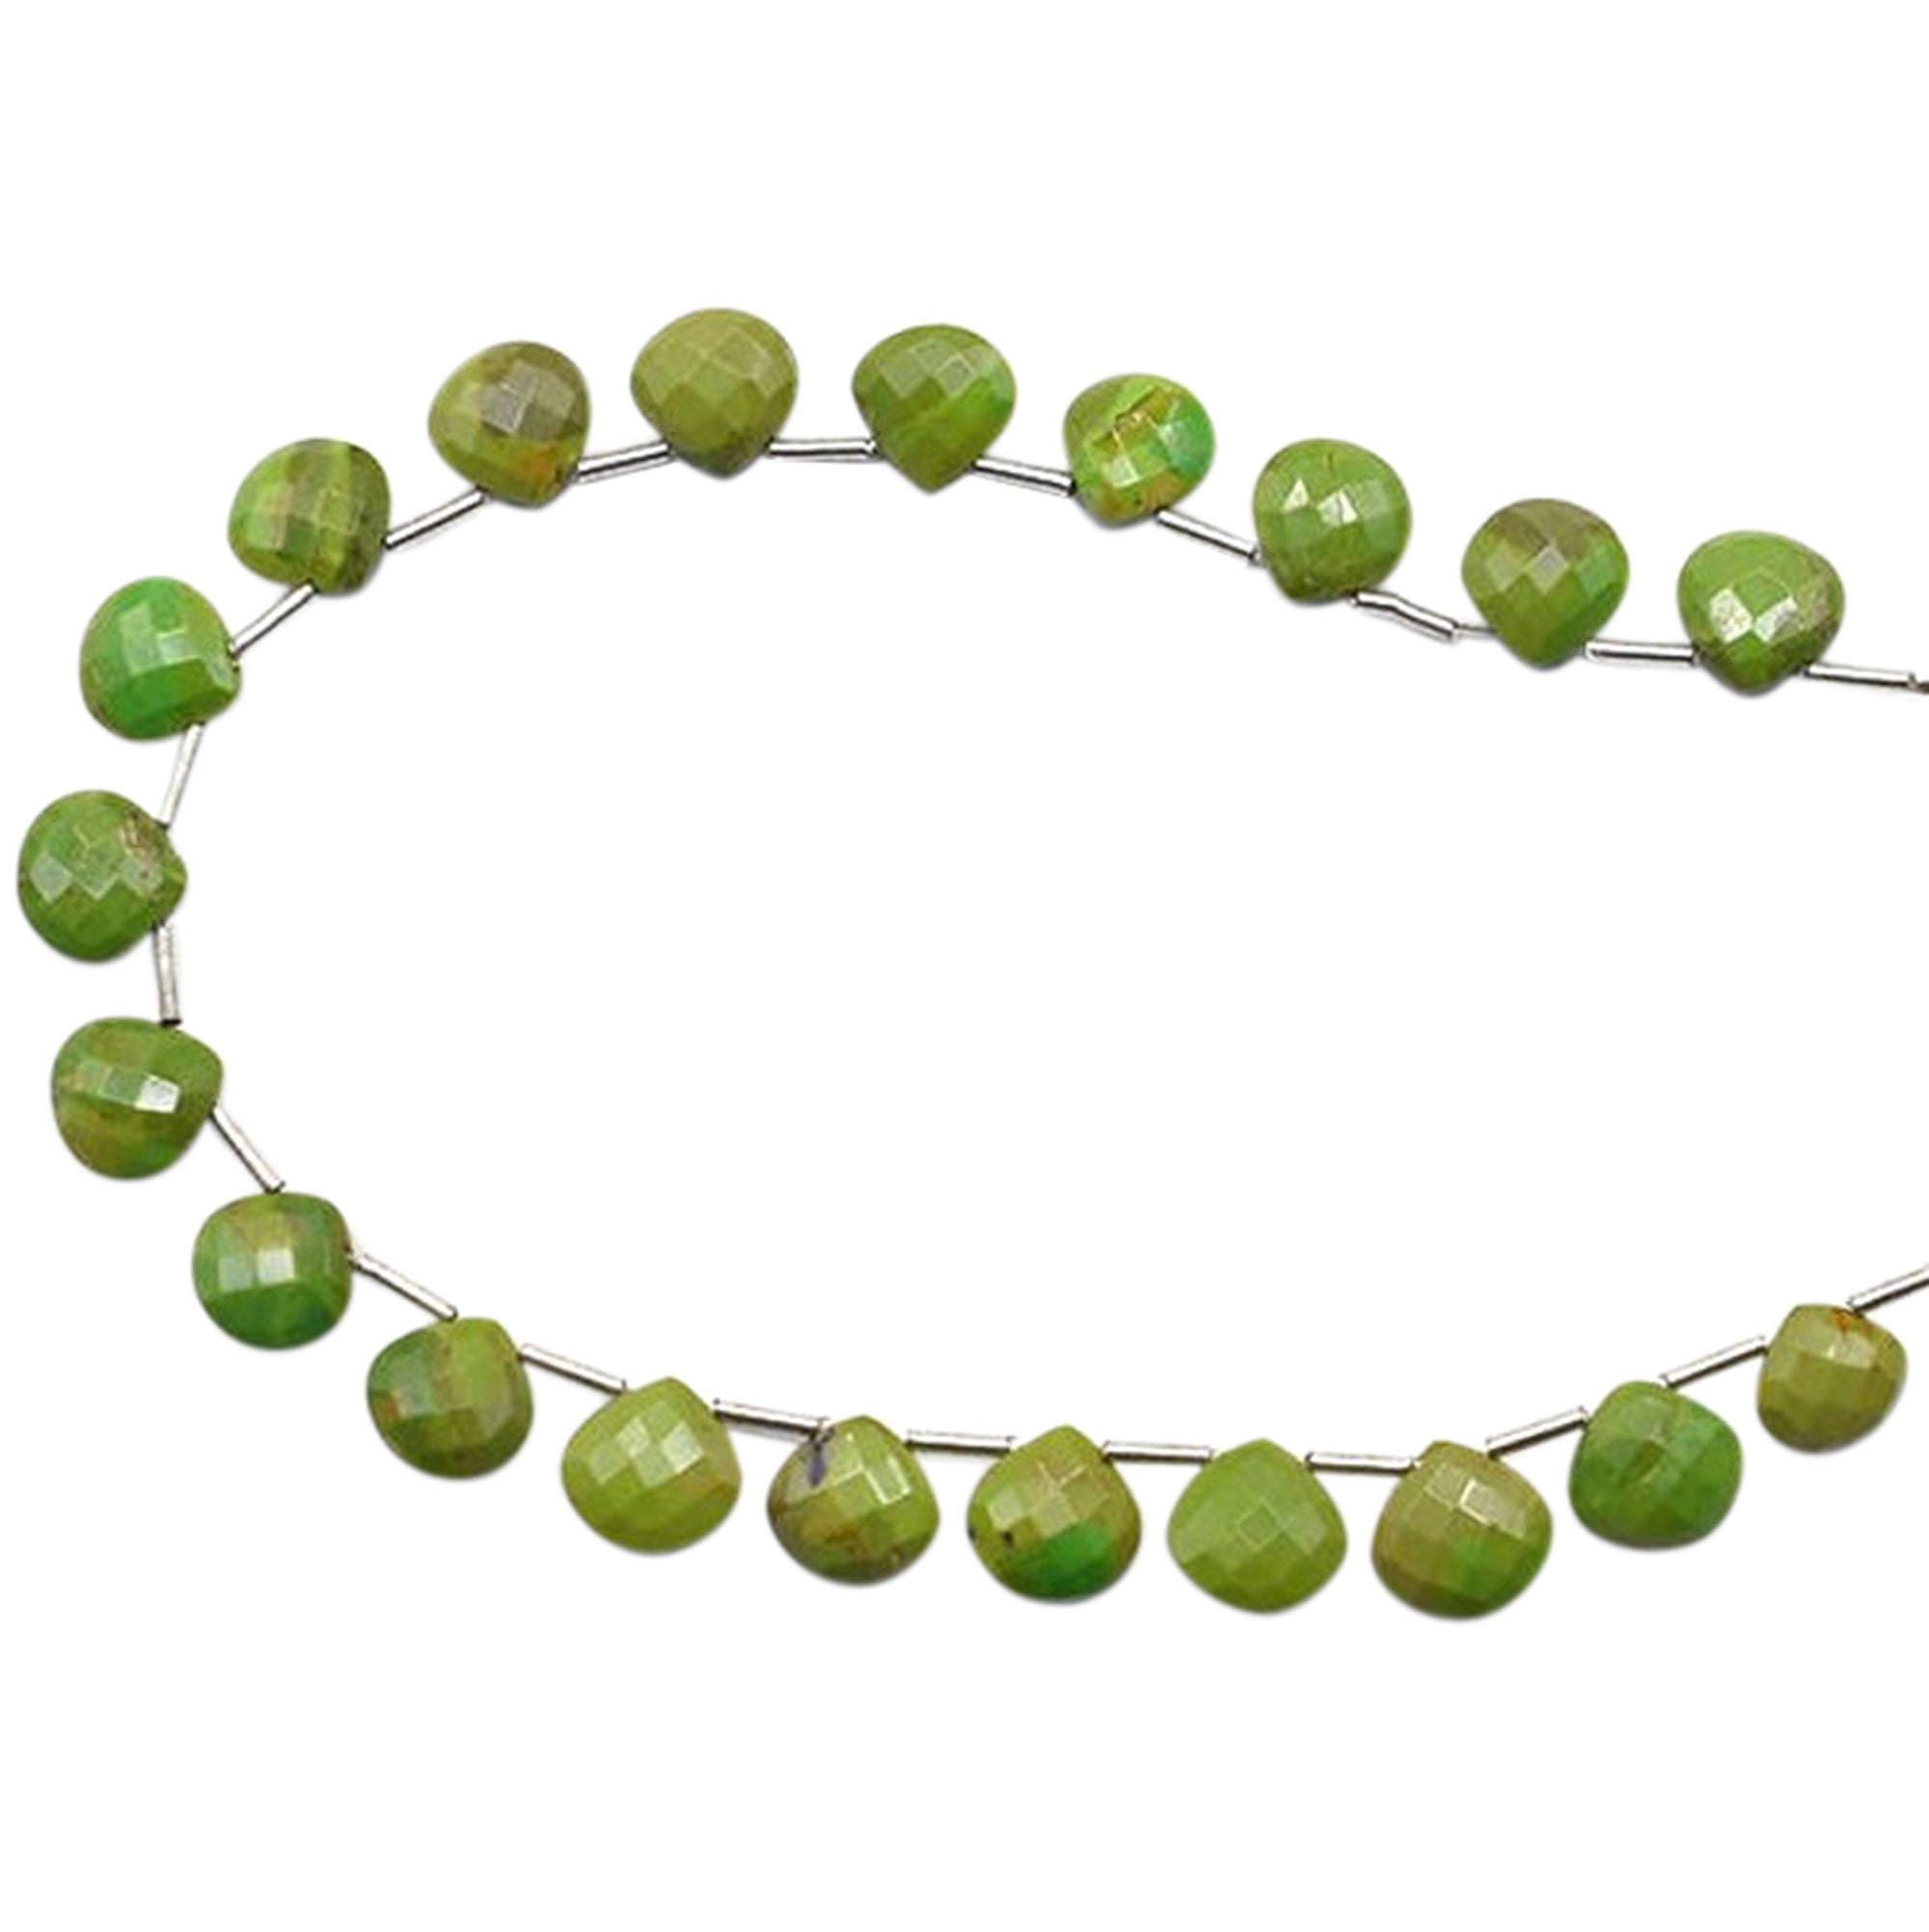 Mojave Green Turquoise 9 MM Faceted Heart Shape Beads Strand